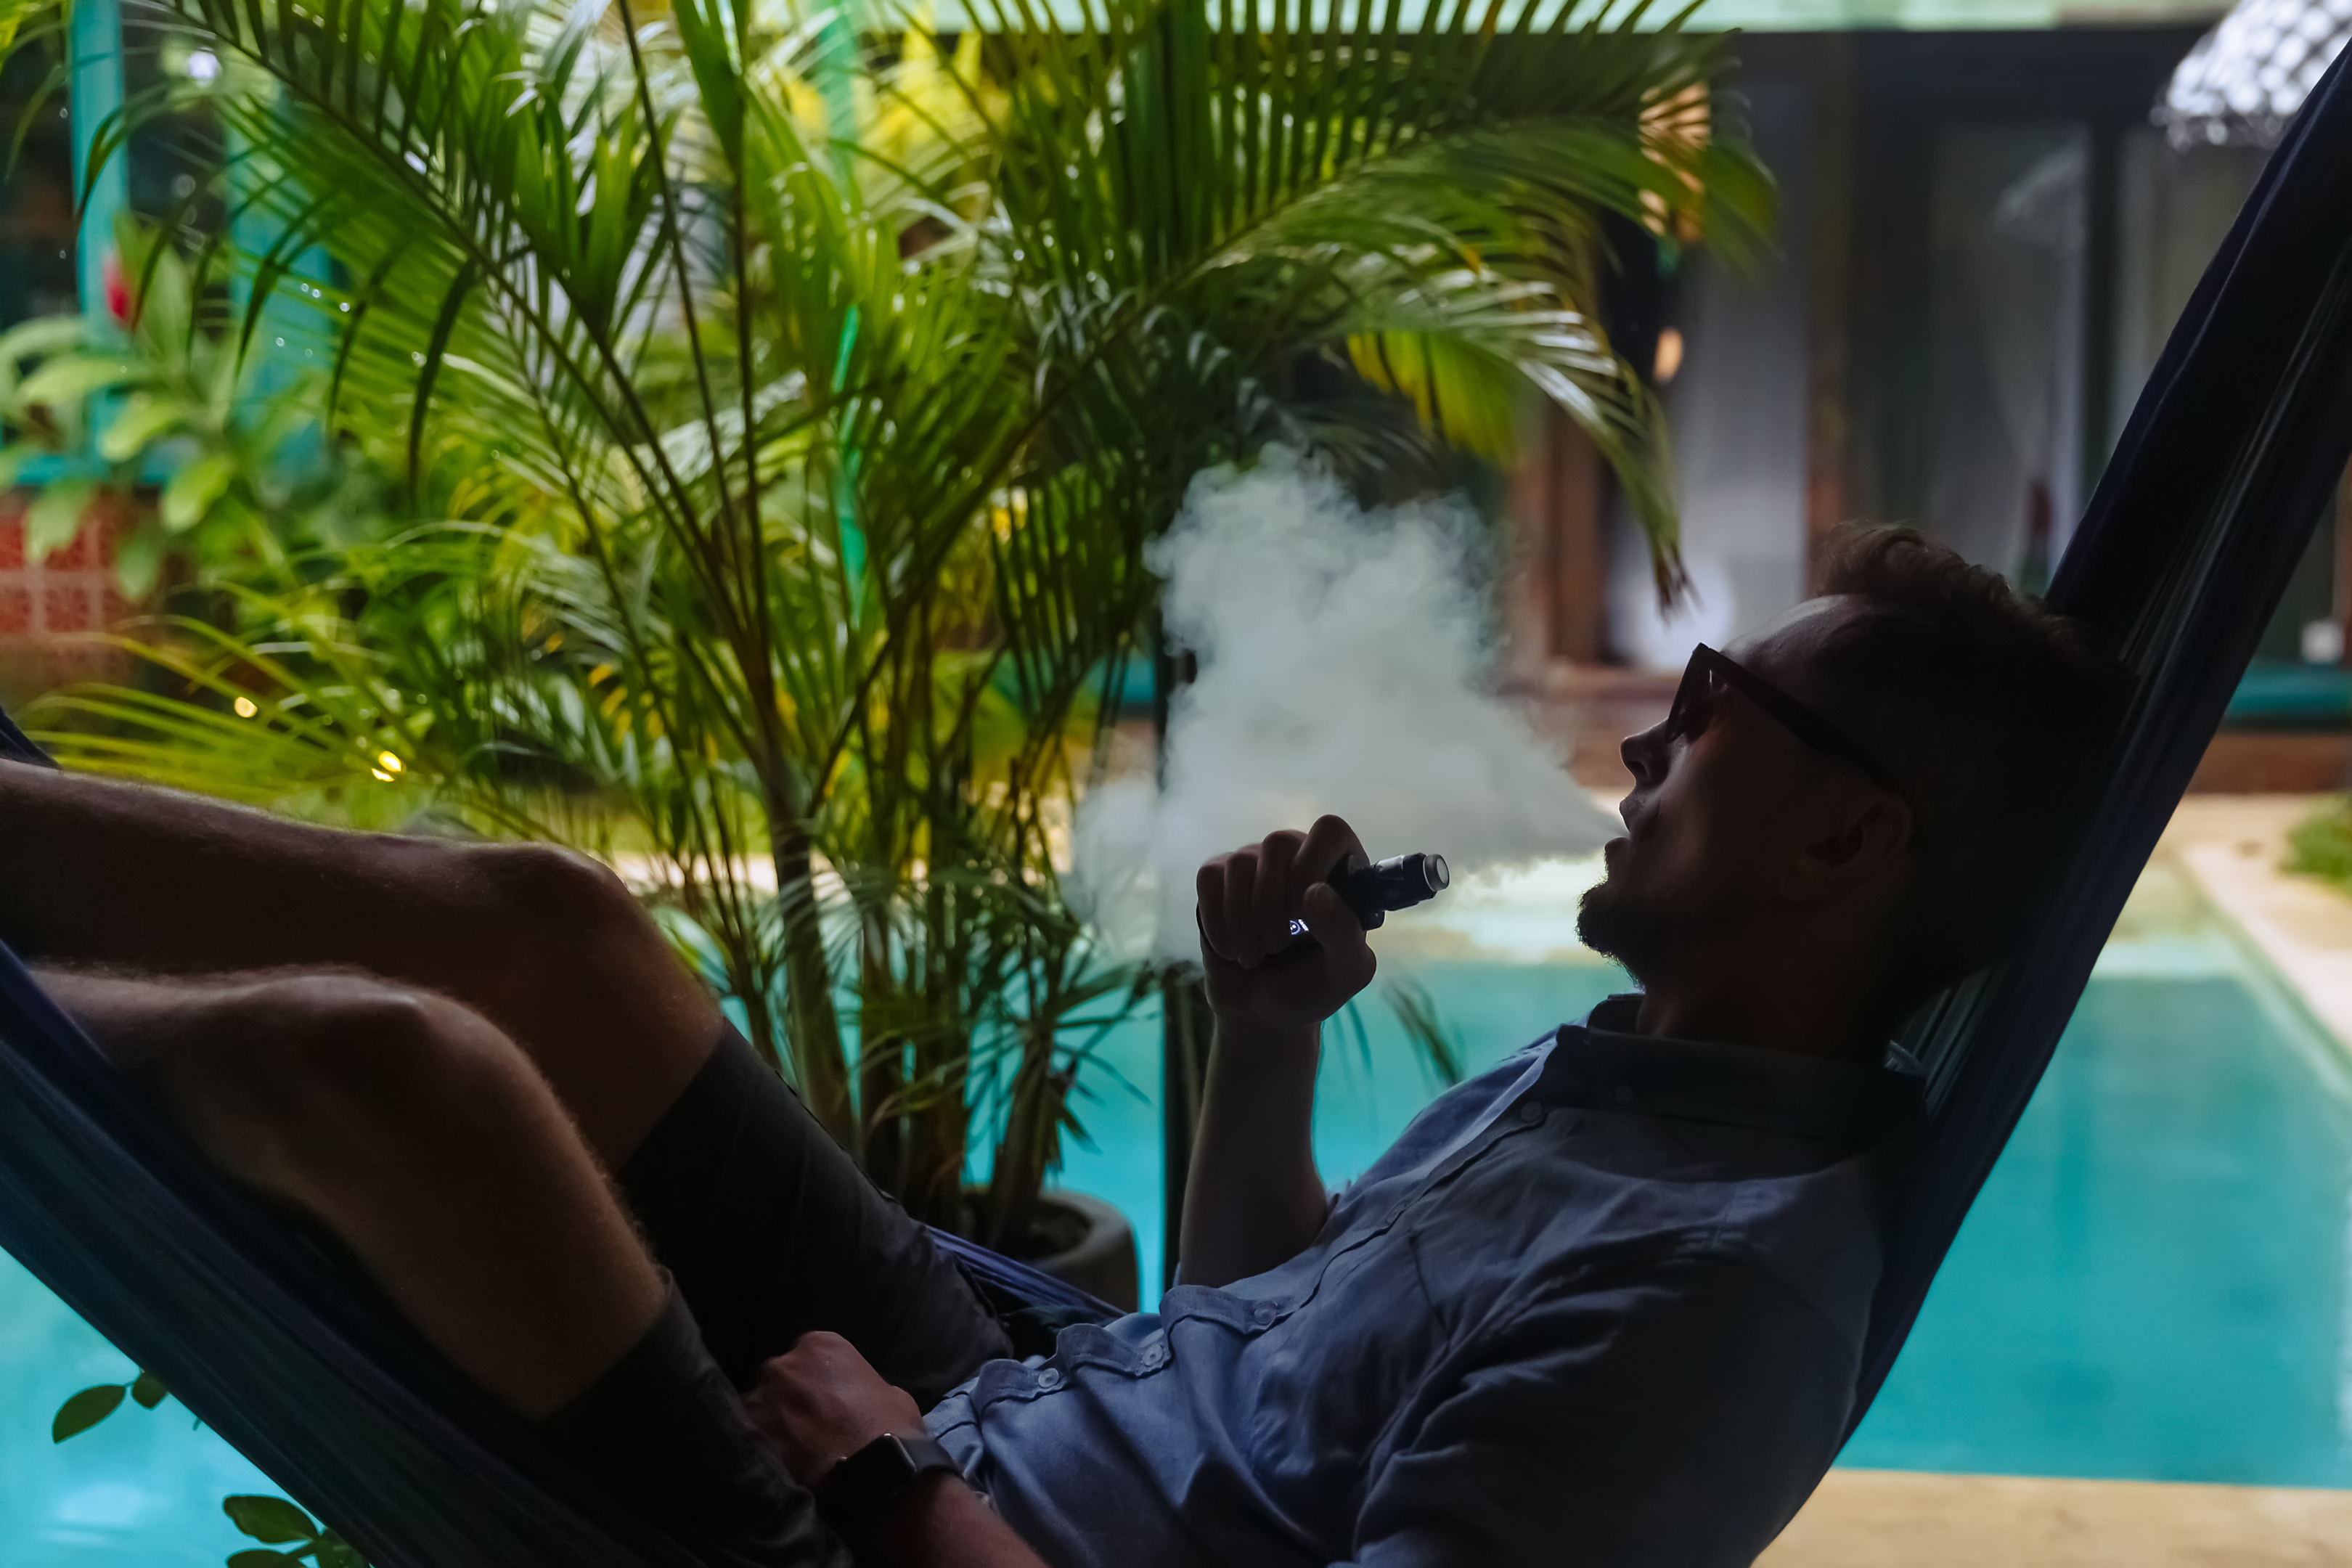 Guy hitting his CBD vape with high quality CBC and CBD oil or vape liquid. CBD oils in CBD pens should be high quality from pure CBD like Comfortably Numb with CBD CBN. 